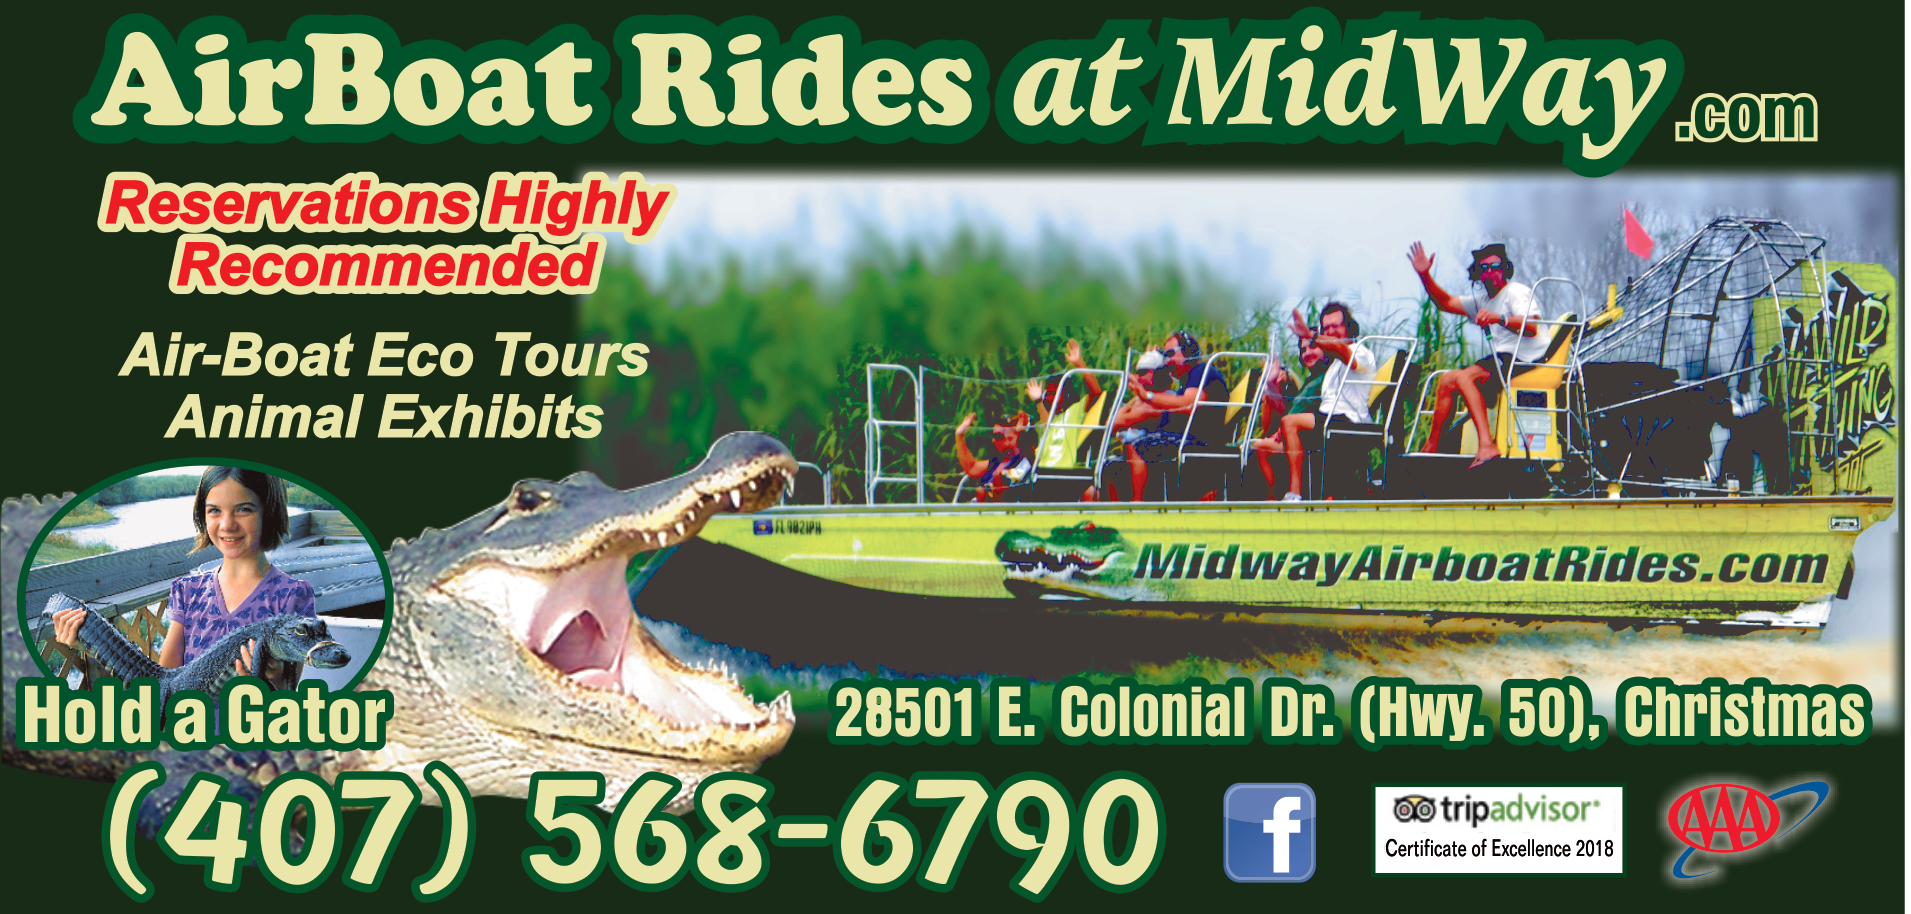 Airboat Rides at Midway Print Ad